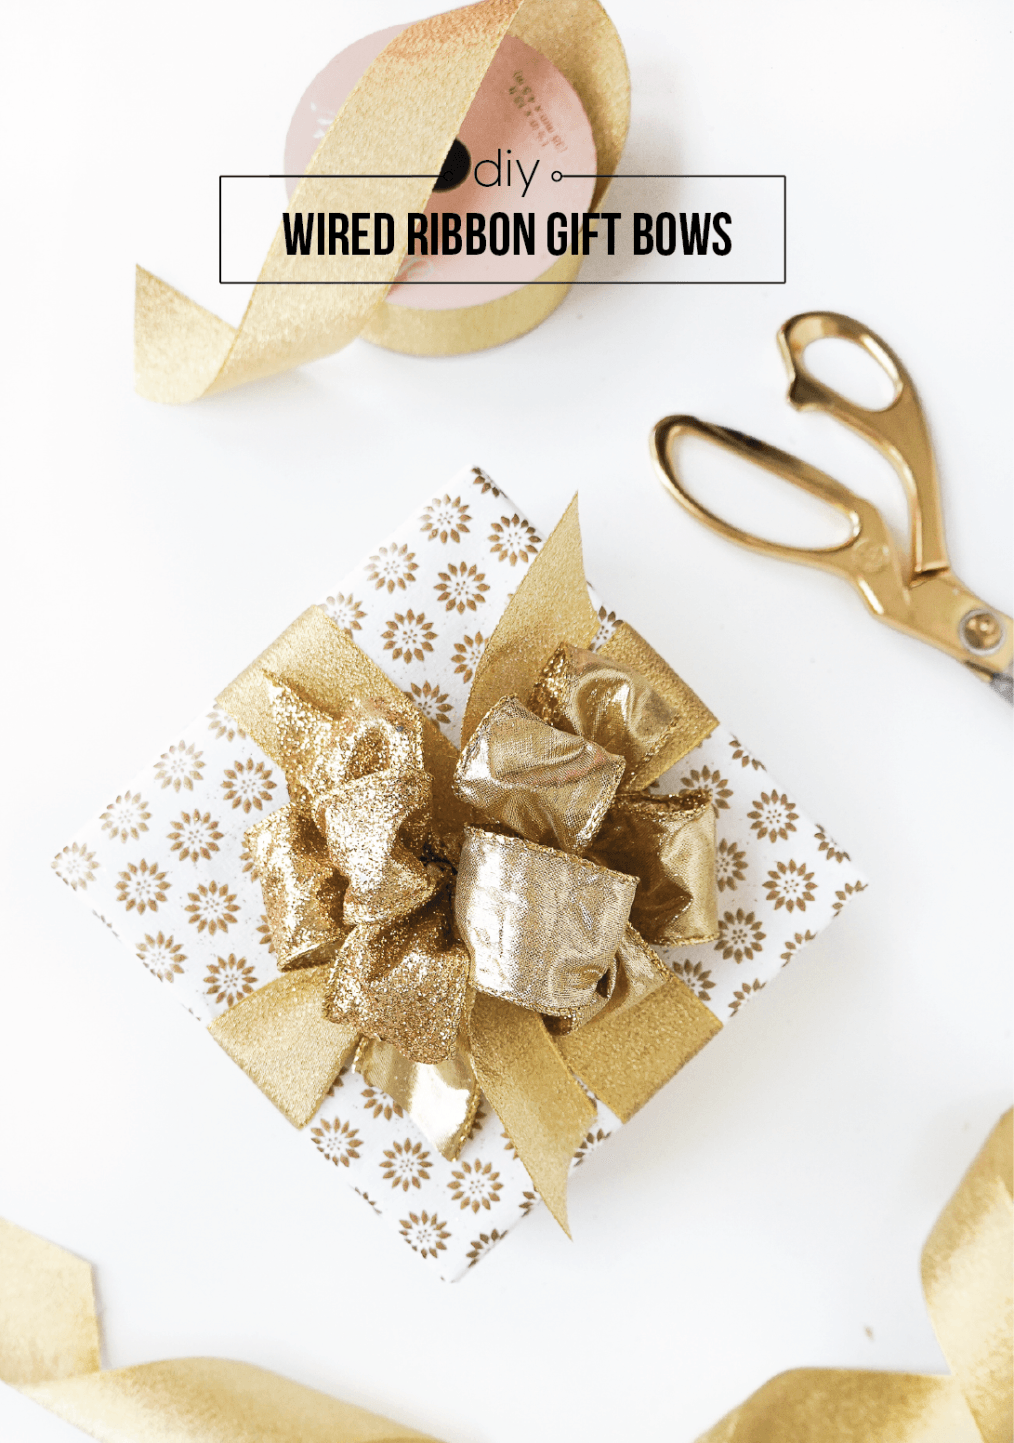 How To Make a Bow with Wired Ribbon